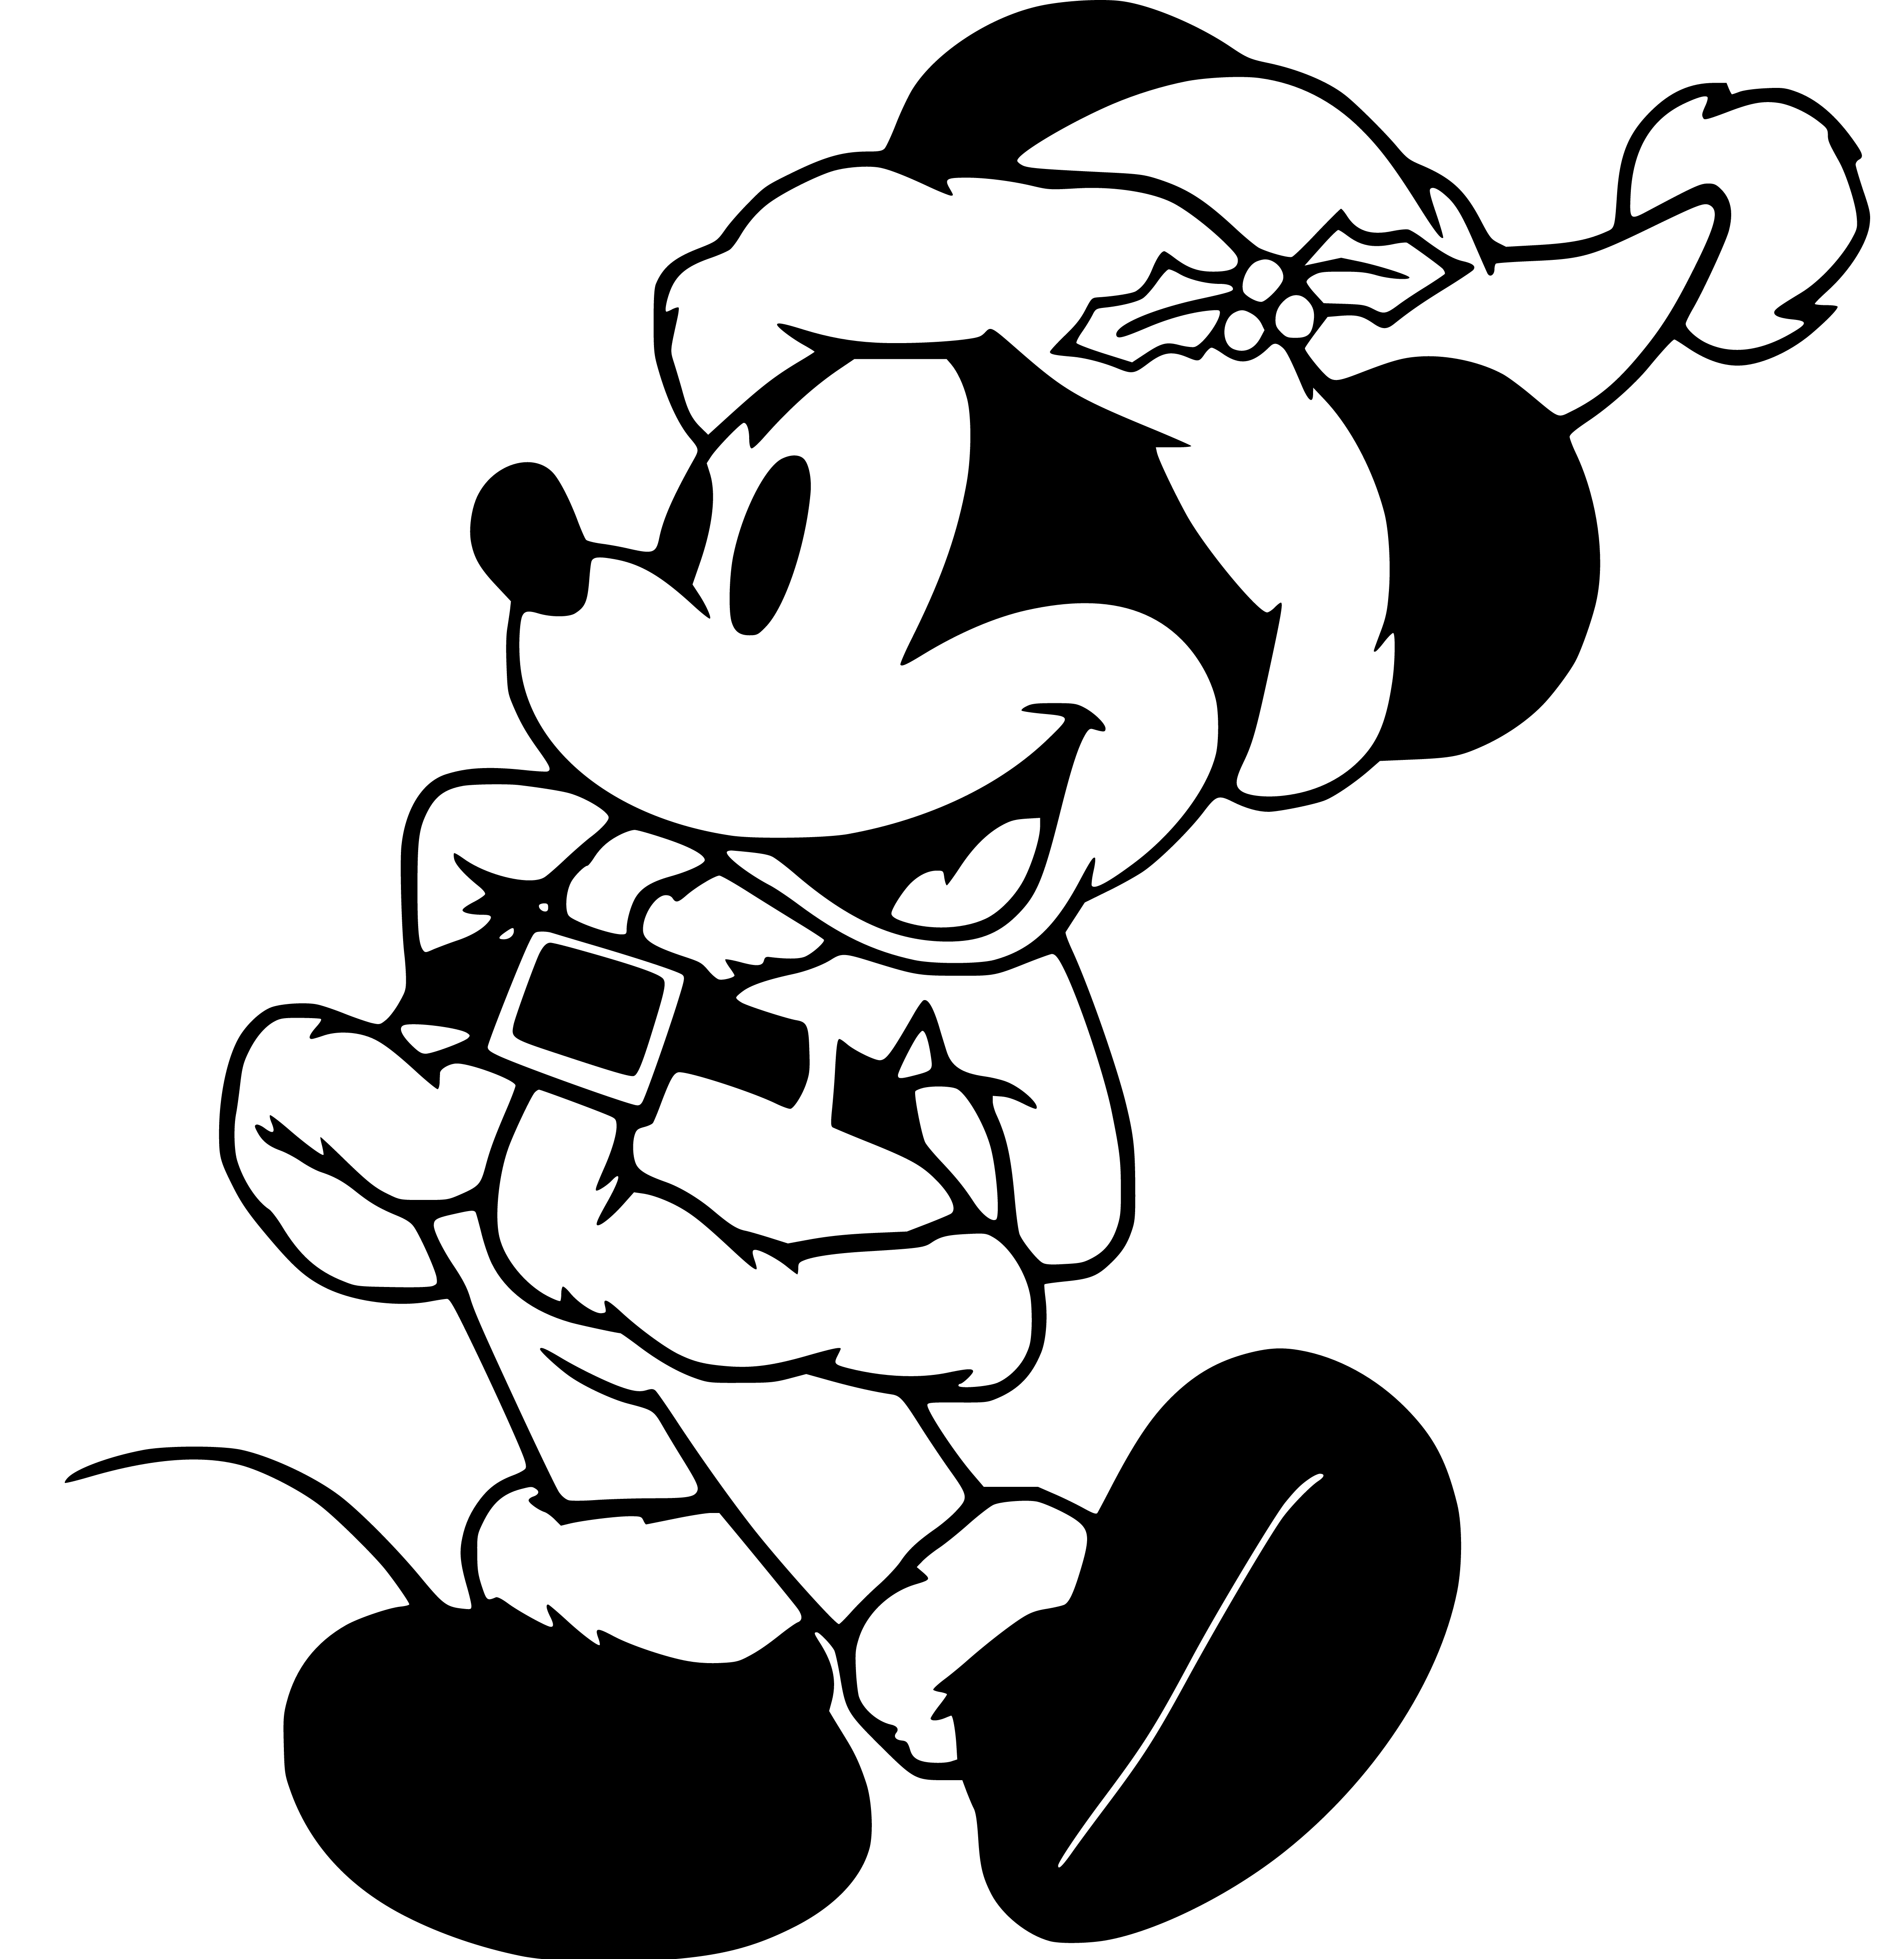 Mickey Mouse as Santa Claus Coloring Pages for Kids - SheetalColor.com